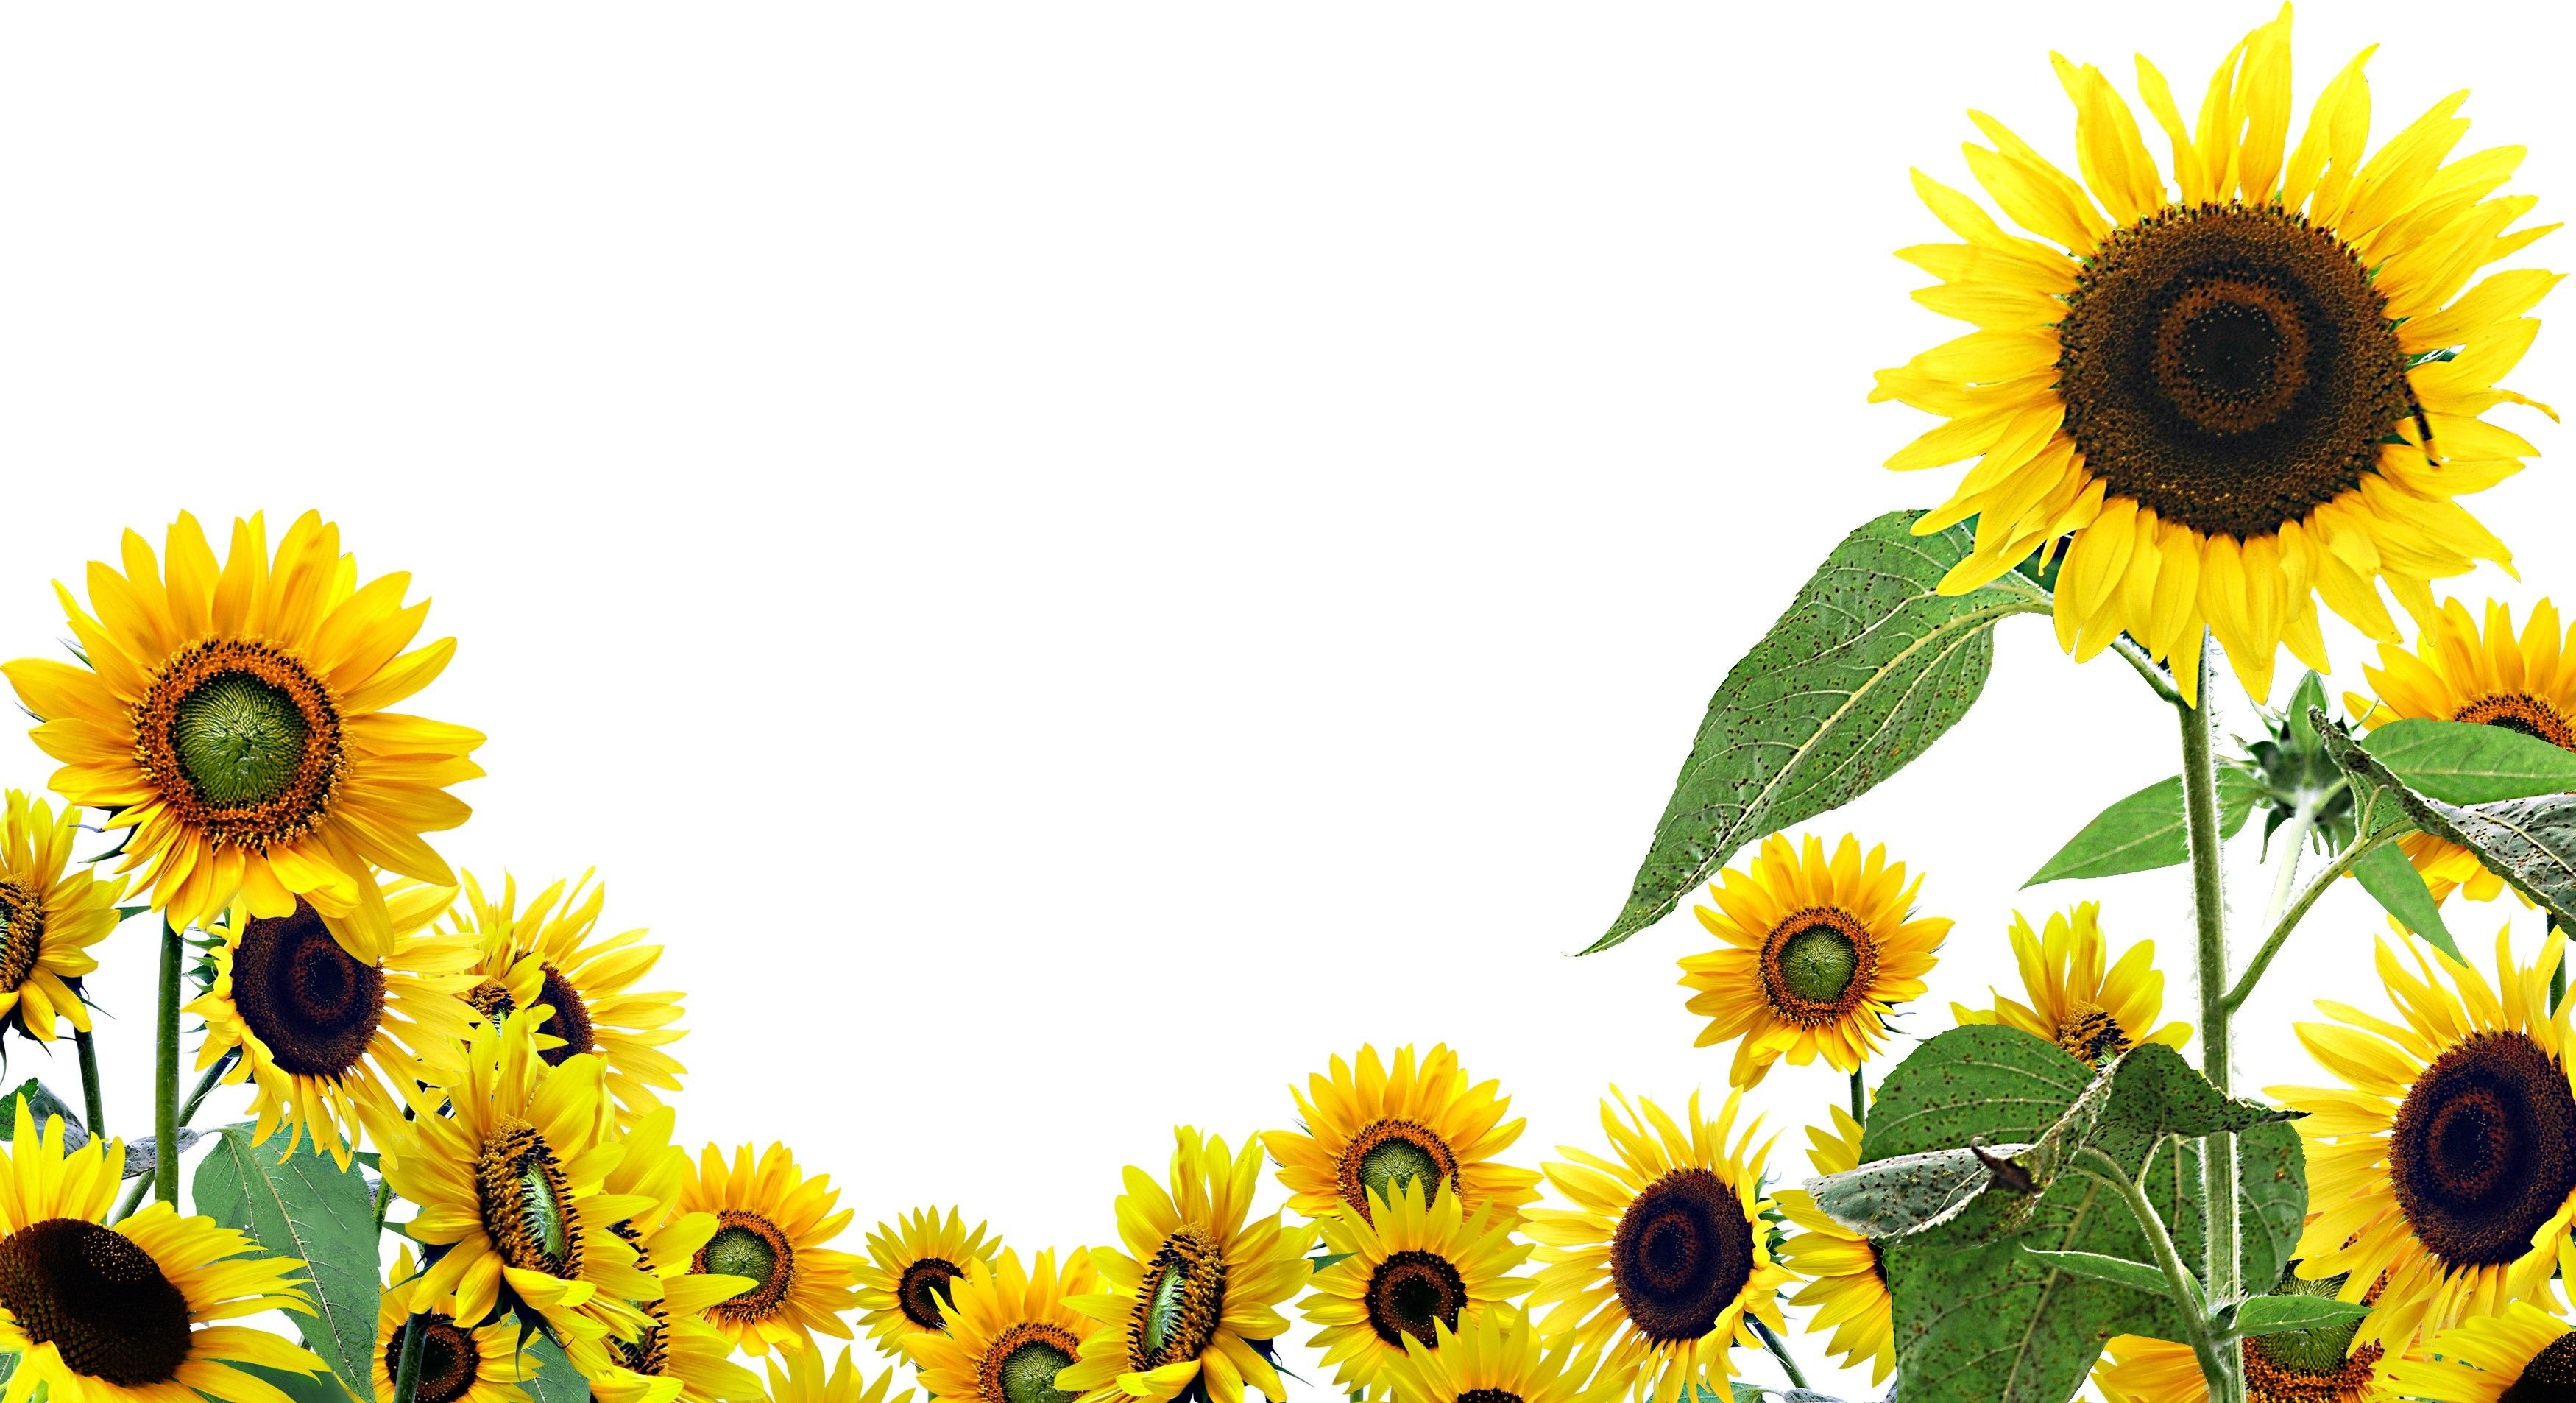 Sunflowers on a white background - Sunflower